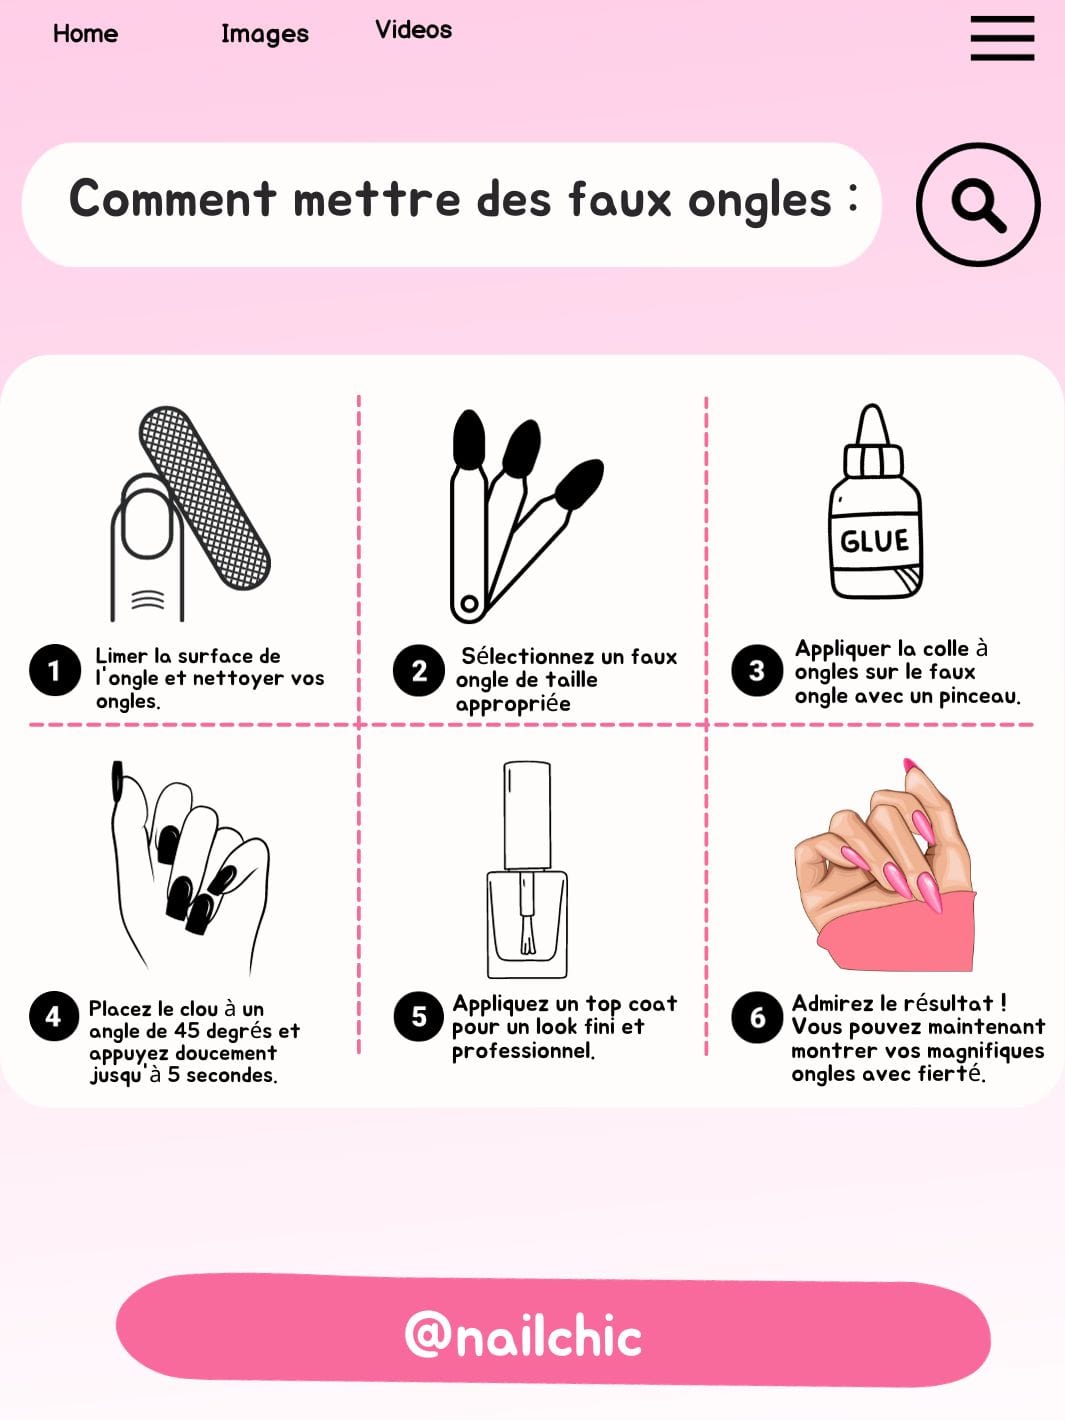 French faux ongle Nail Chic